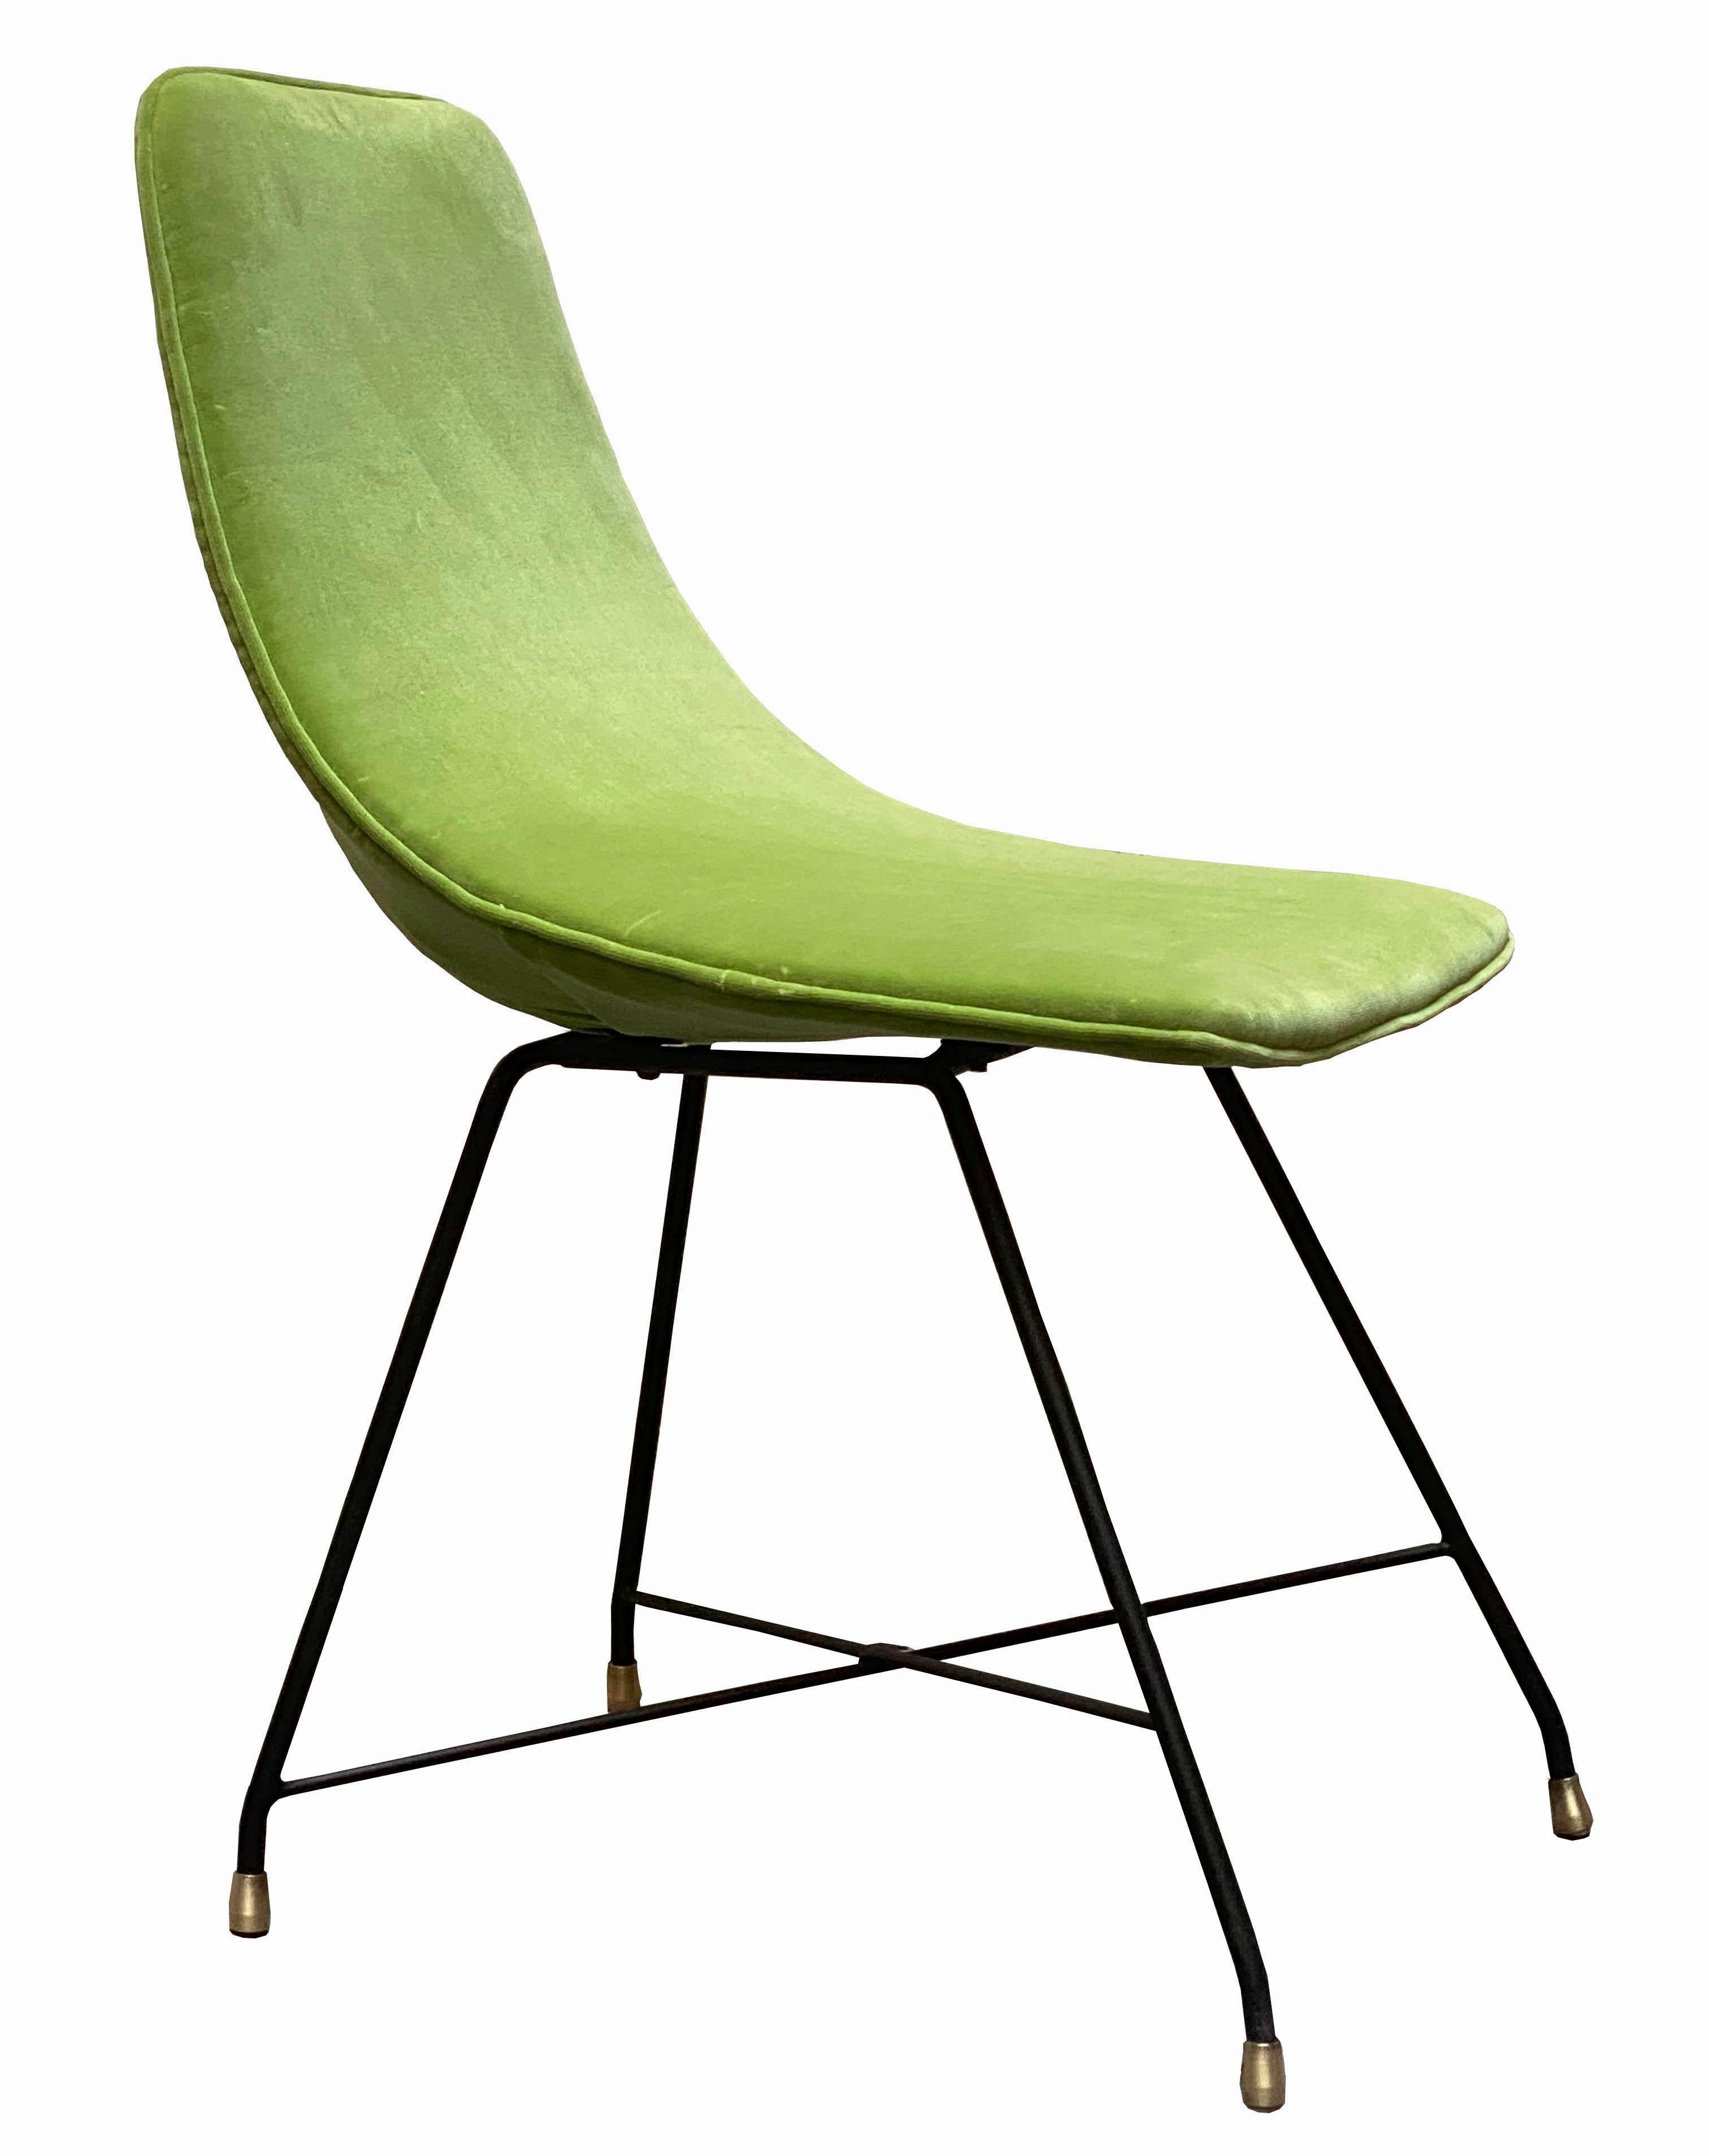 Chair Mod. 'Aster' designed by Augusto Bozzi and made for Fratelli Saporiti in 1956.Iron frame, with foam rubber seat covered in green velvet.